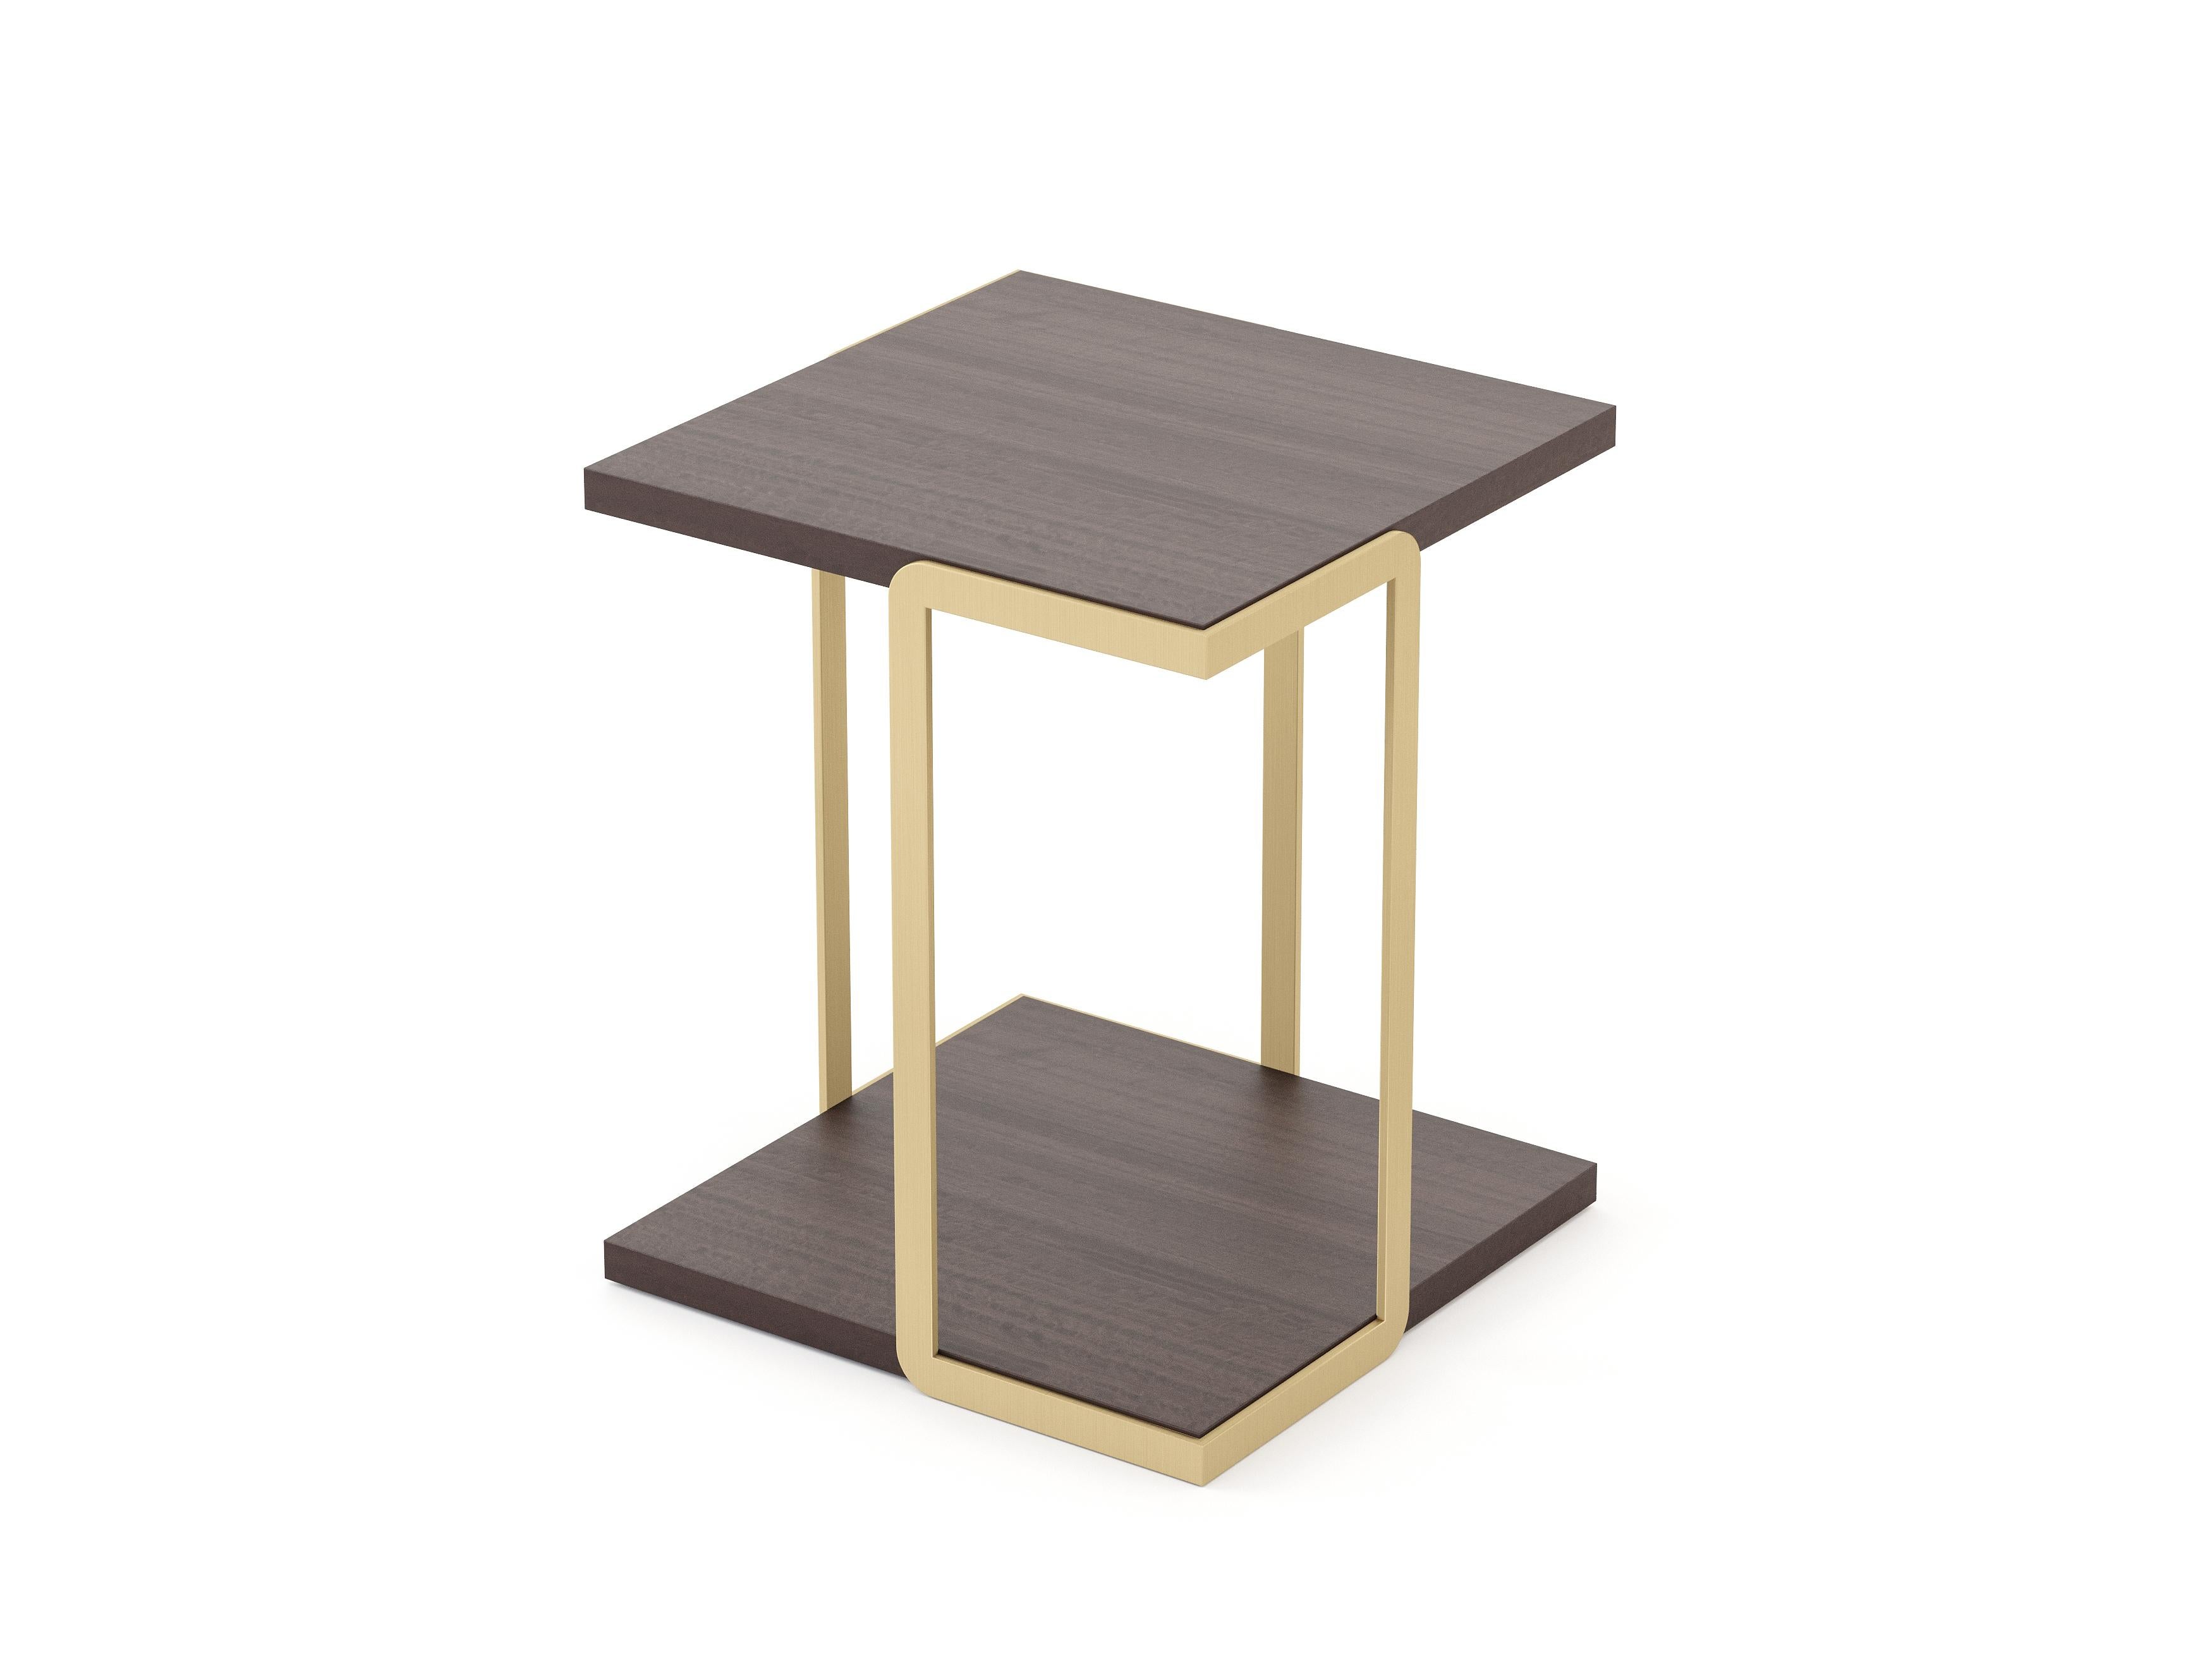 Portuguese Modern Bridge Side Table made with wood and brass, Handmade by Stylish Club For Sale